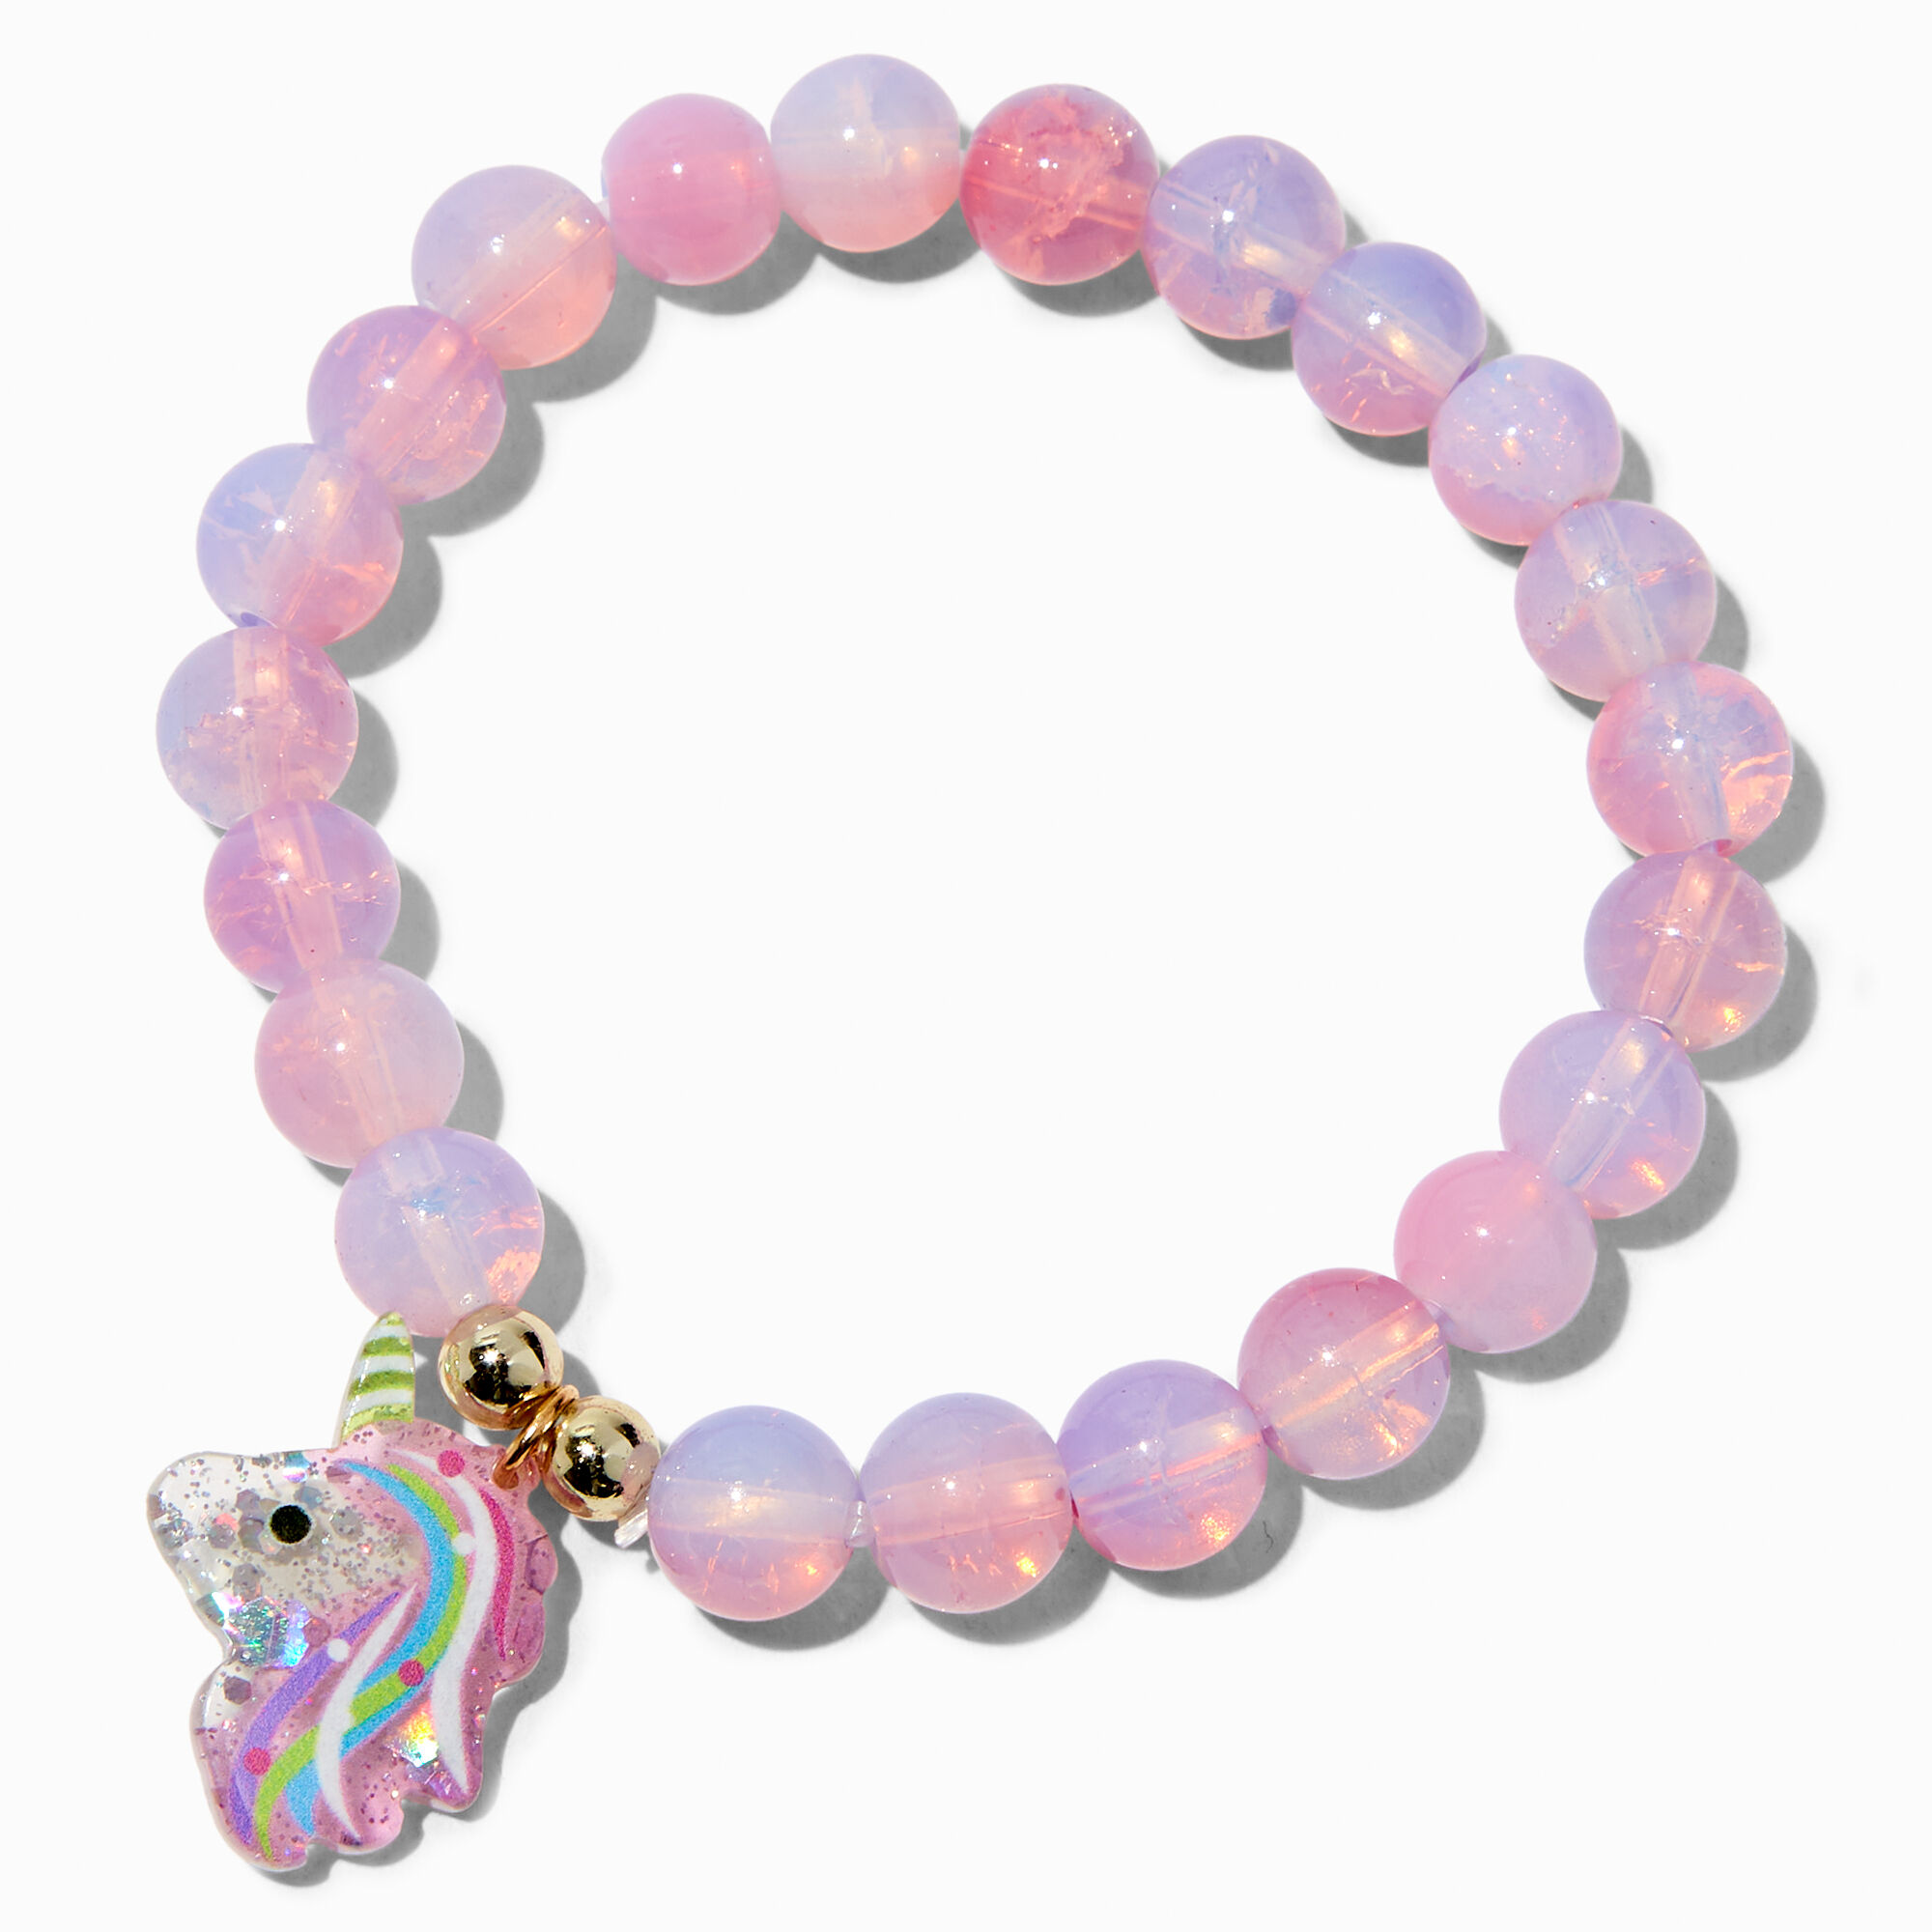 View Claires Glitter Unicorn Beaded Stretch Bracelet Gold information